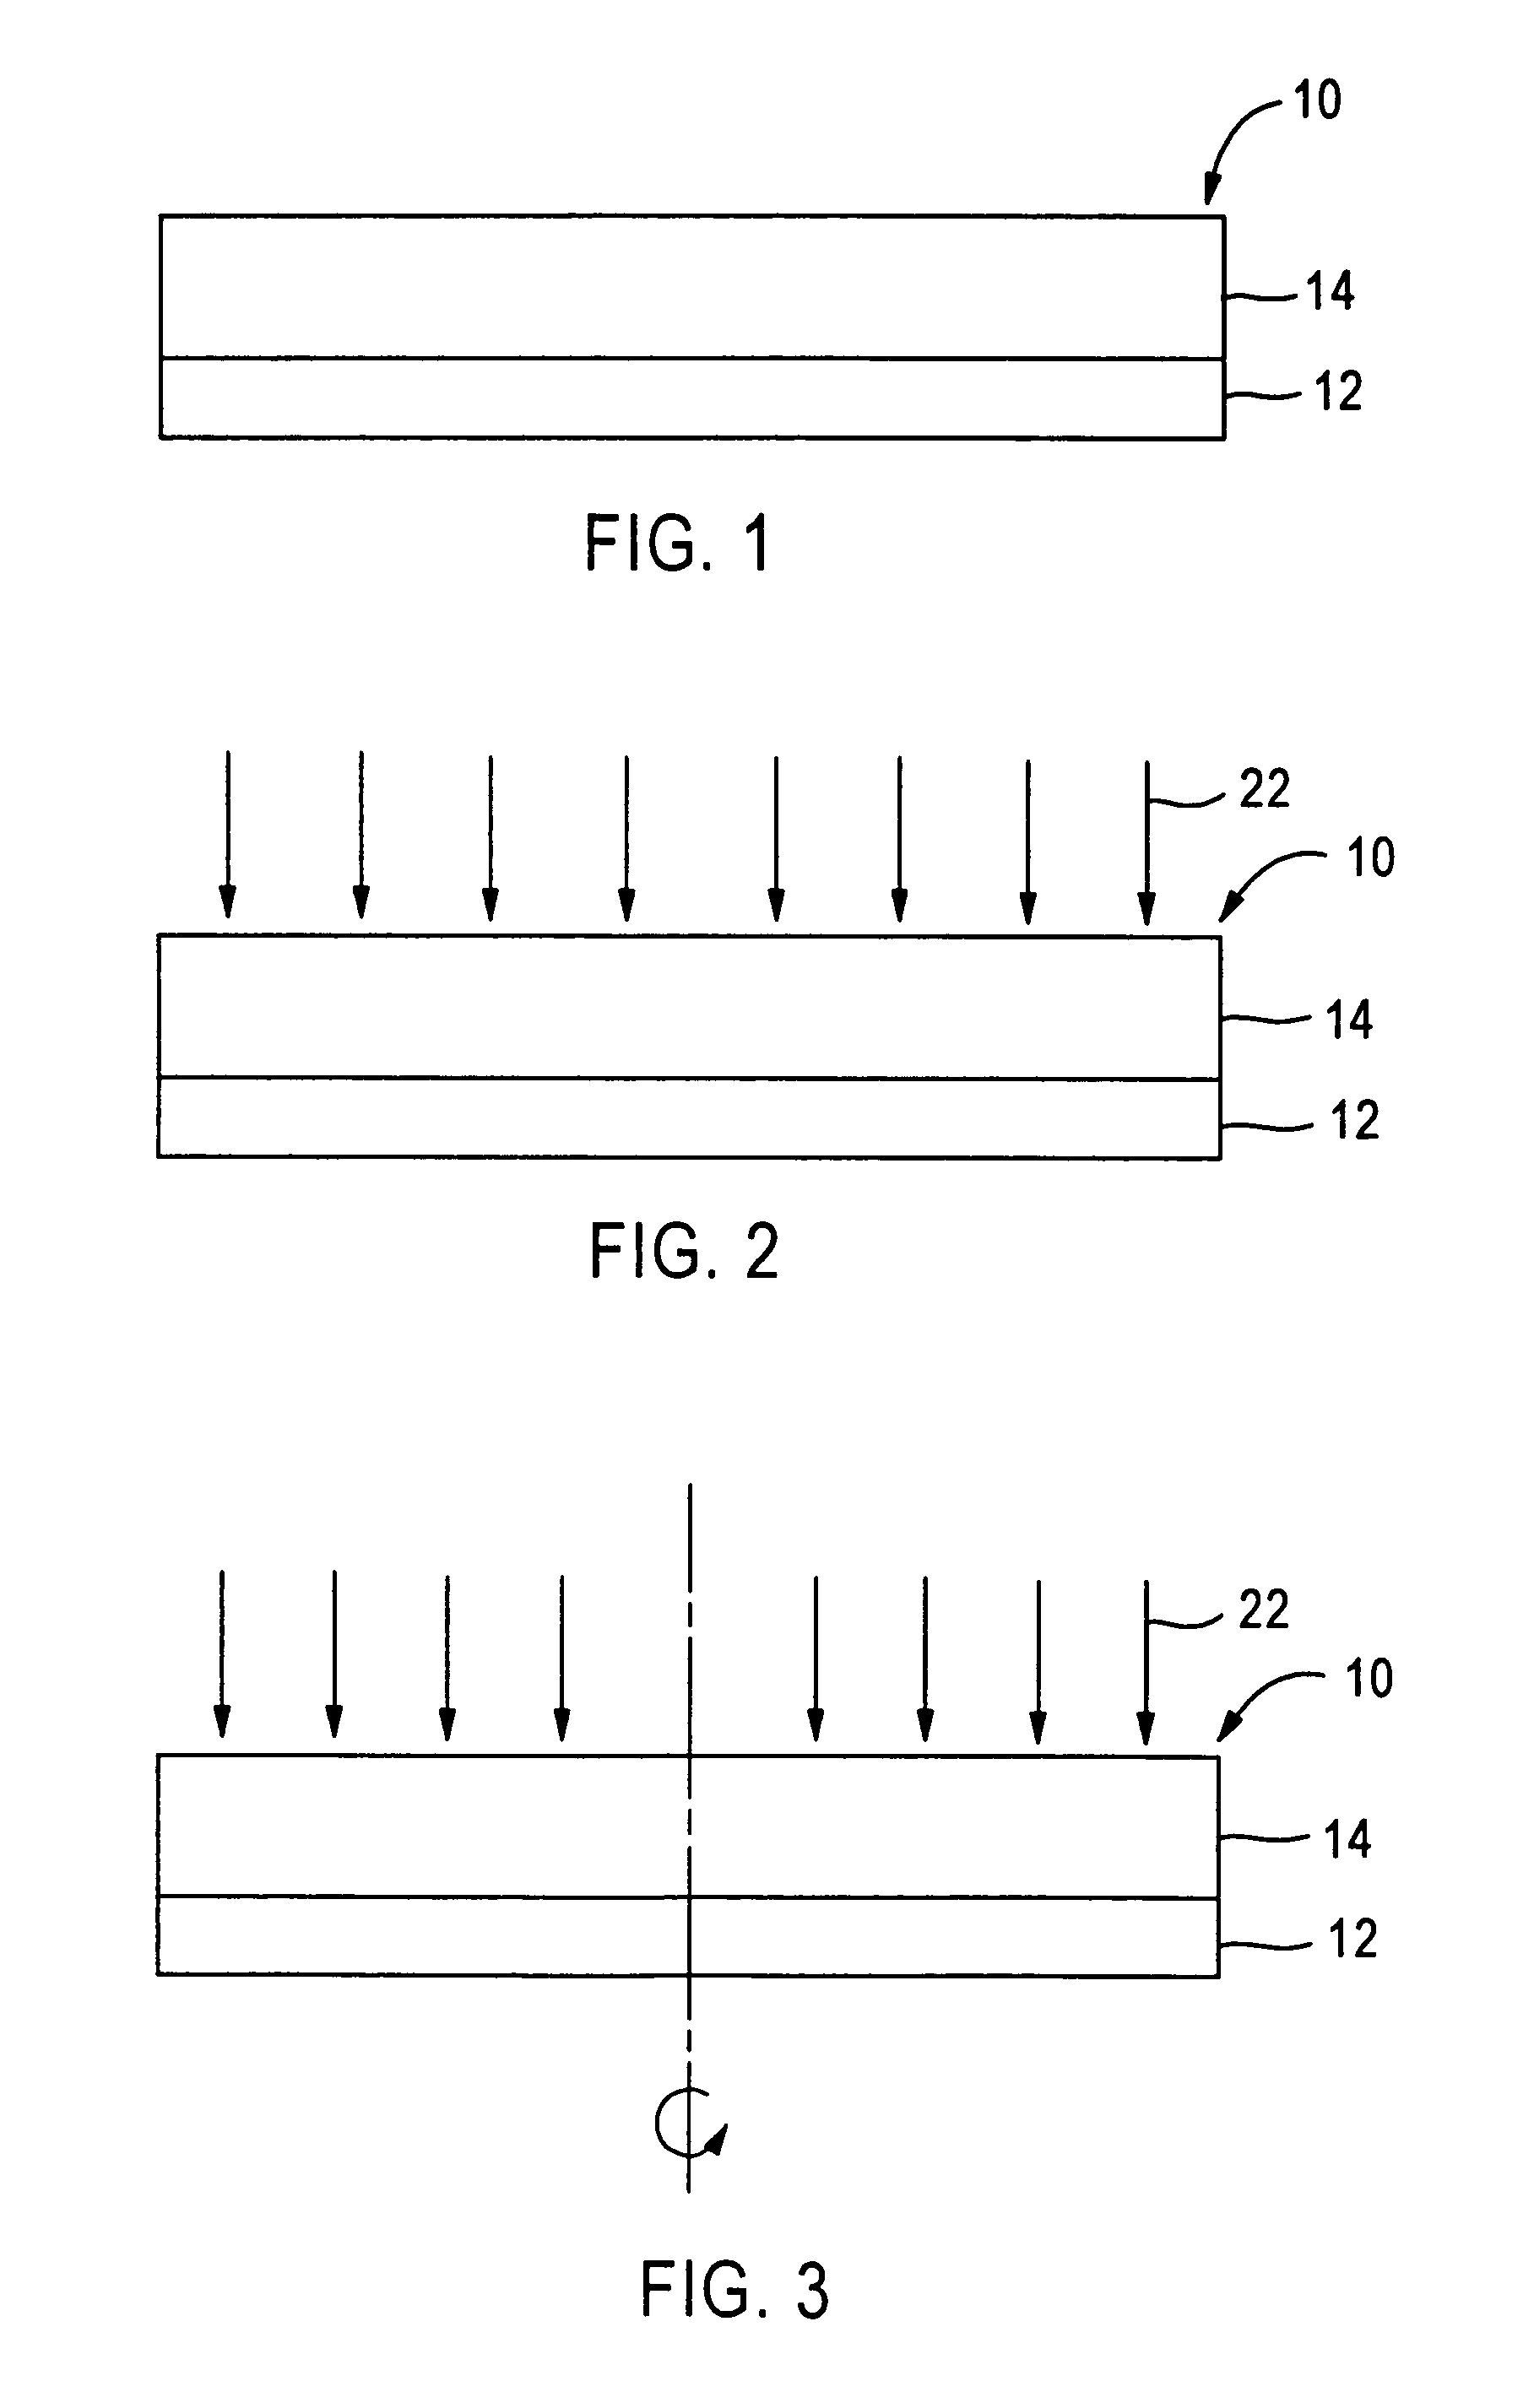 Method of forming semiconductor devices by microwave curing of low-k dielectric films